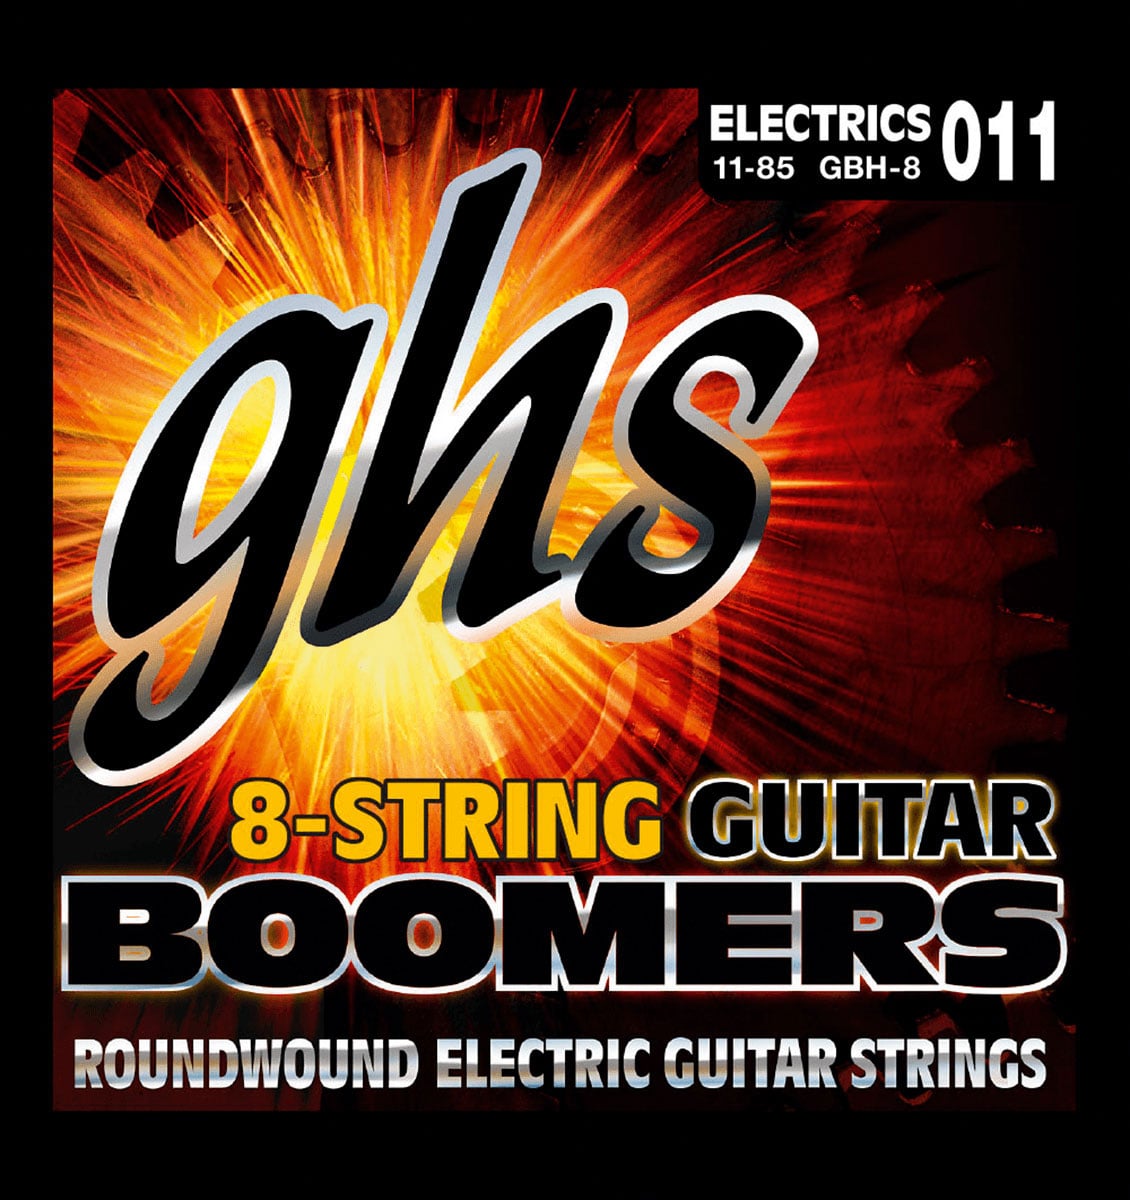 GHS GBH-8 BOOMERS HEAVY 8C 11-85